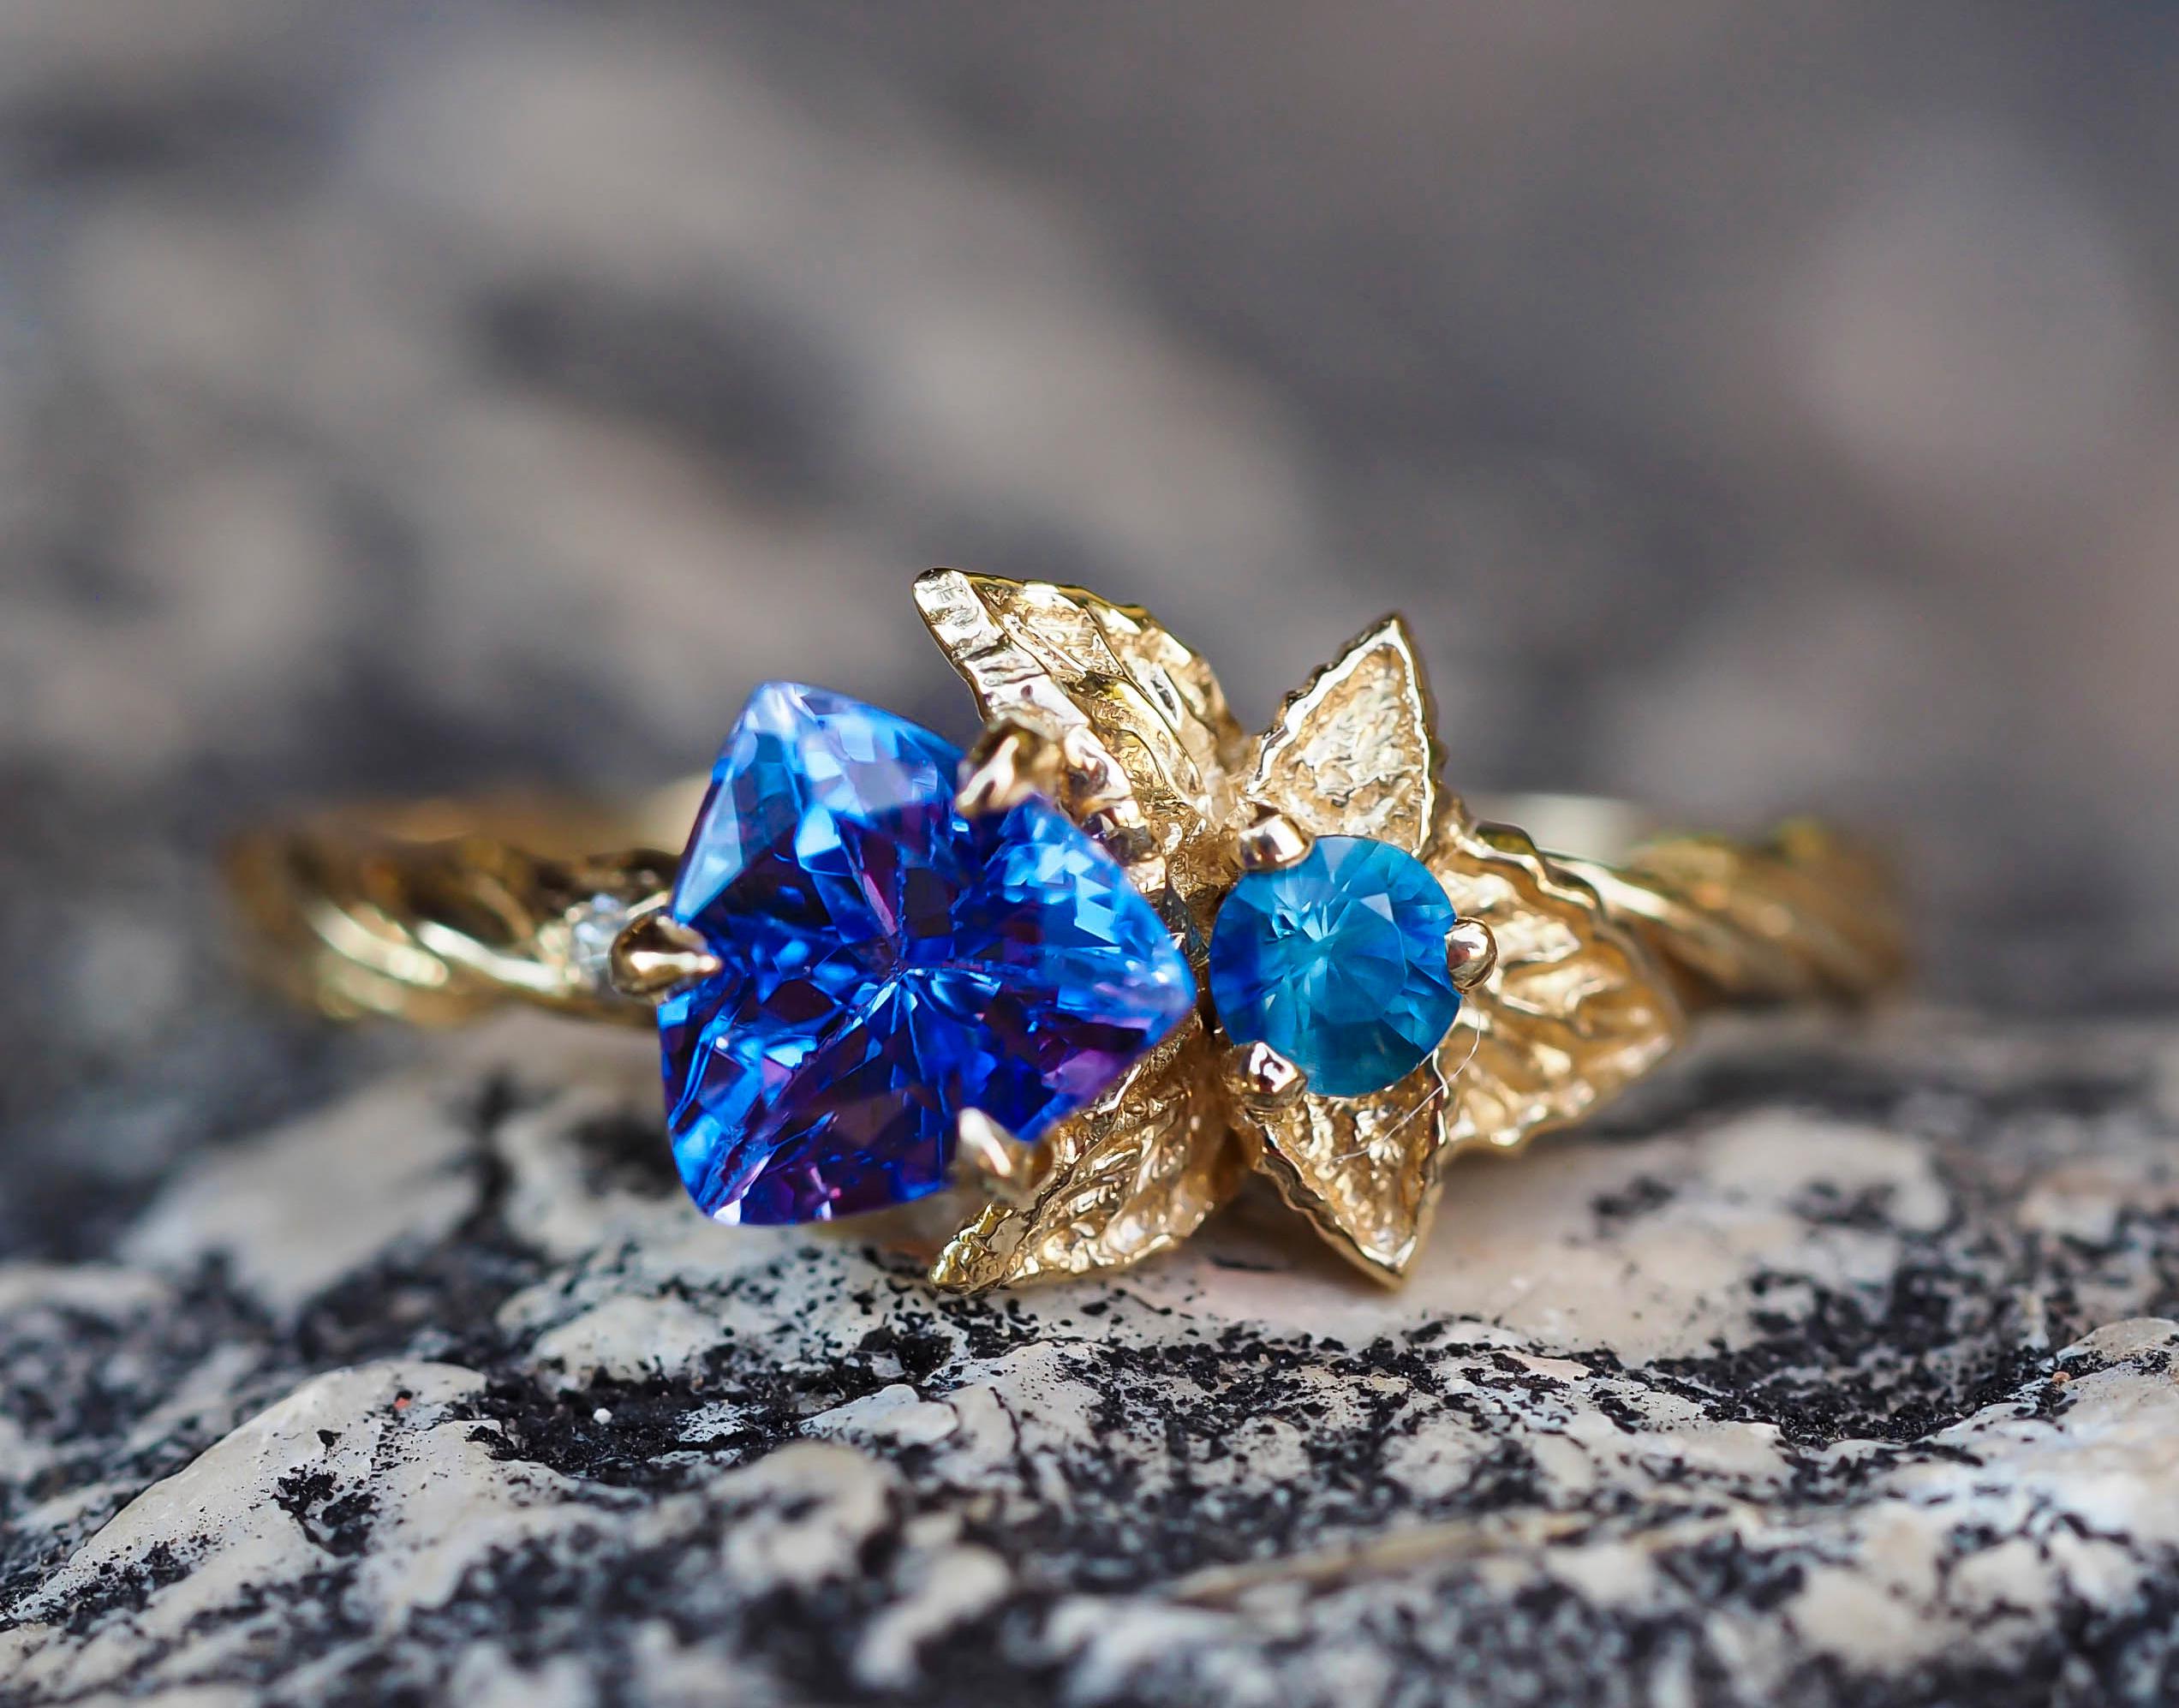 For Sale:  Tanzanite and diamonds 14k gold ring. Flower design ring with tanzanite. 3